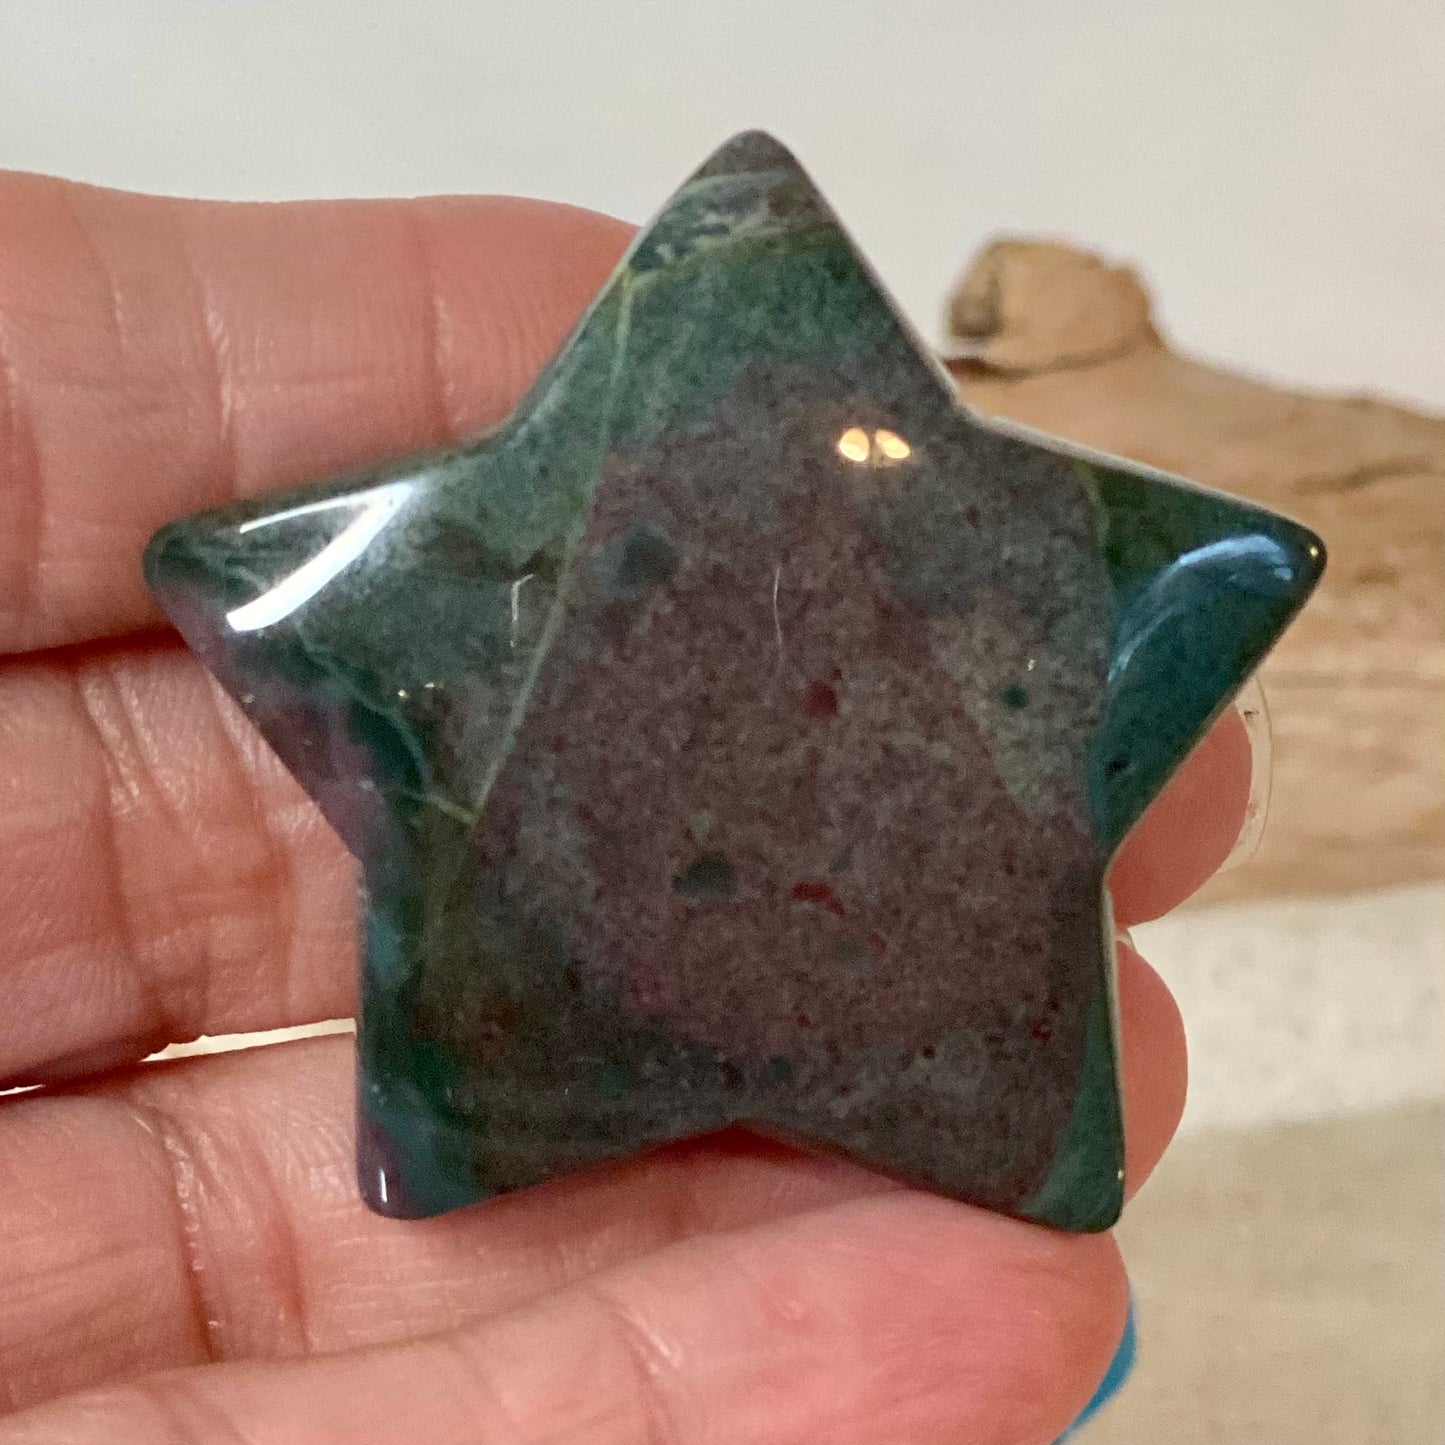 Large Crystal Stars: Celestial Wonders in Your Hands